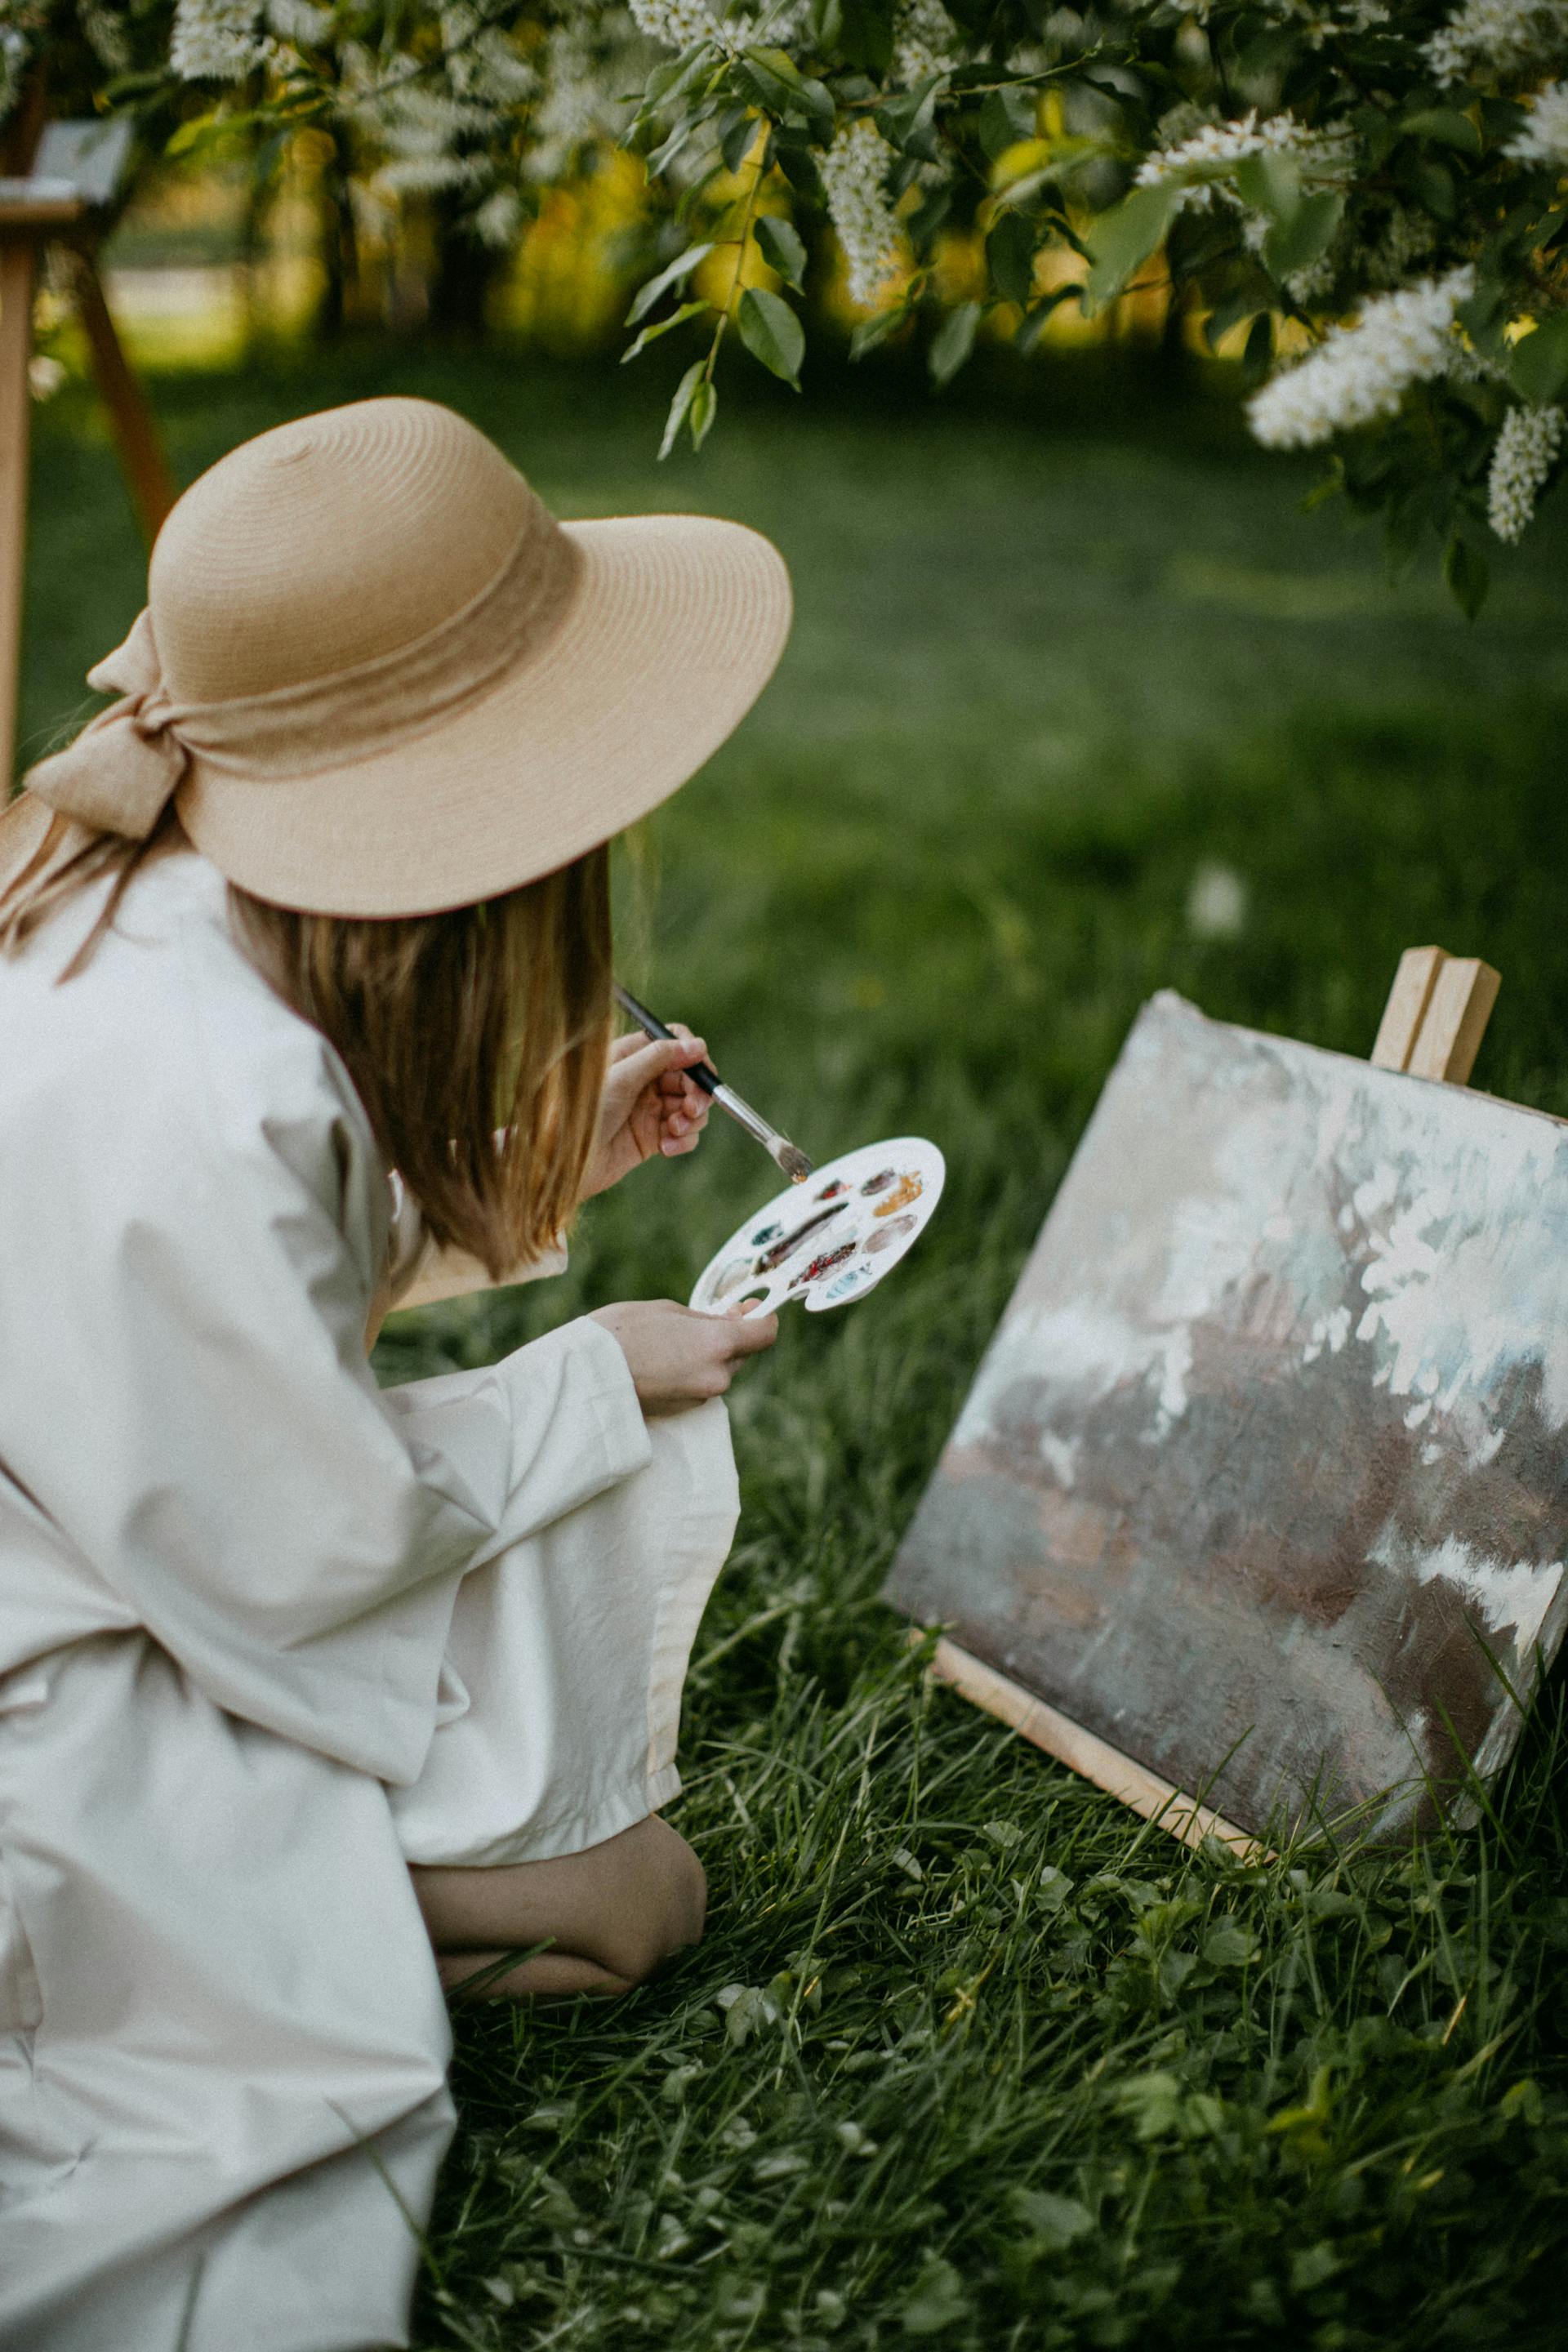 A woman painting outdoors | Source: Pexels